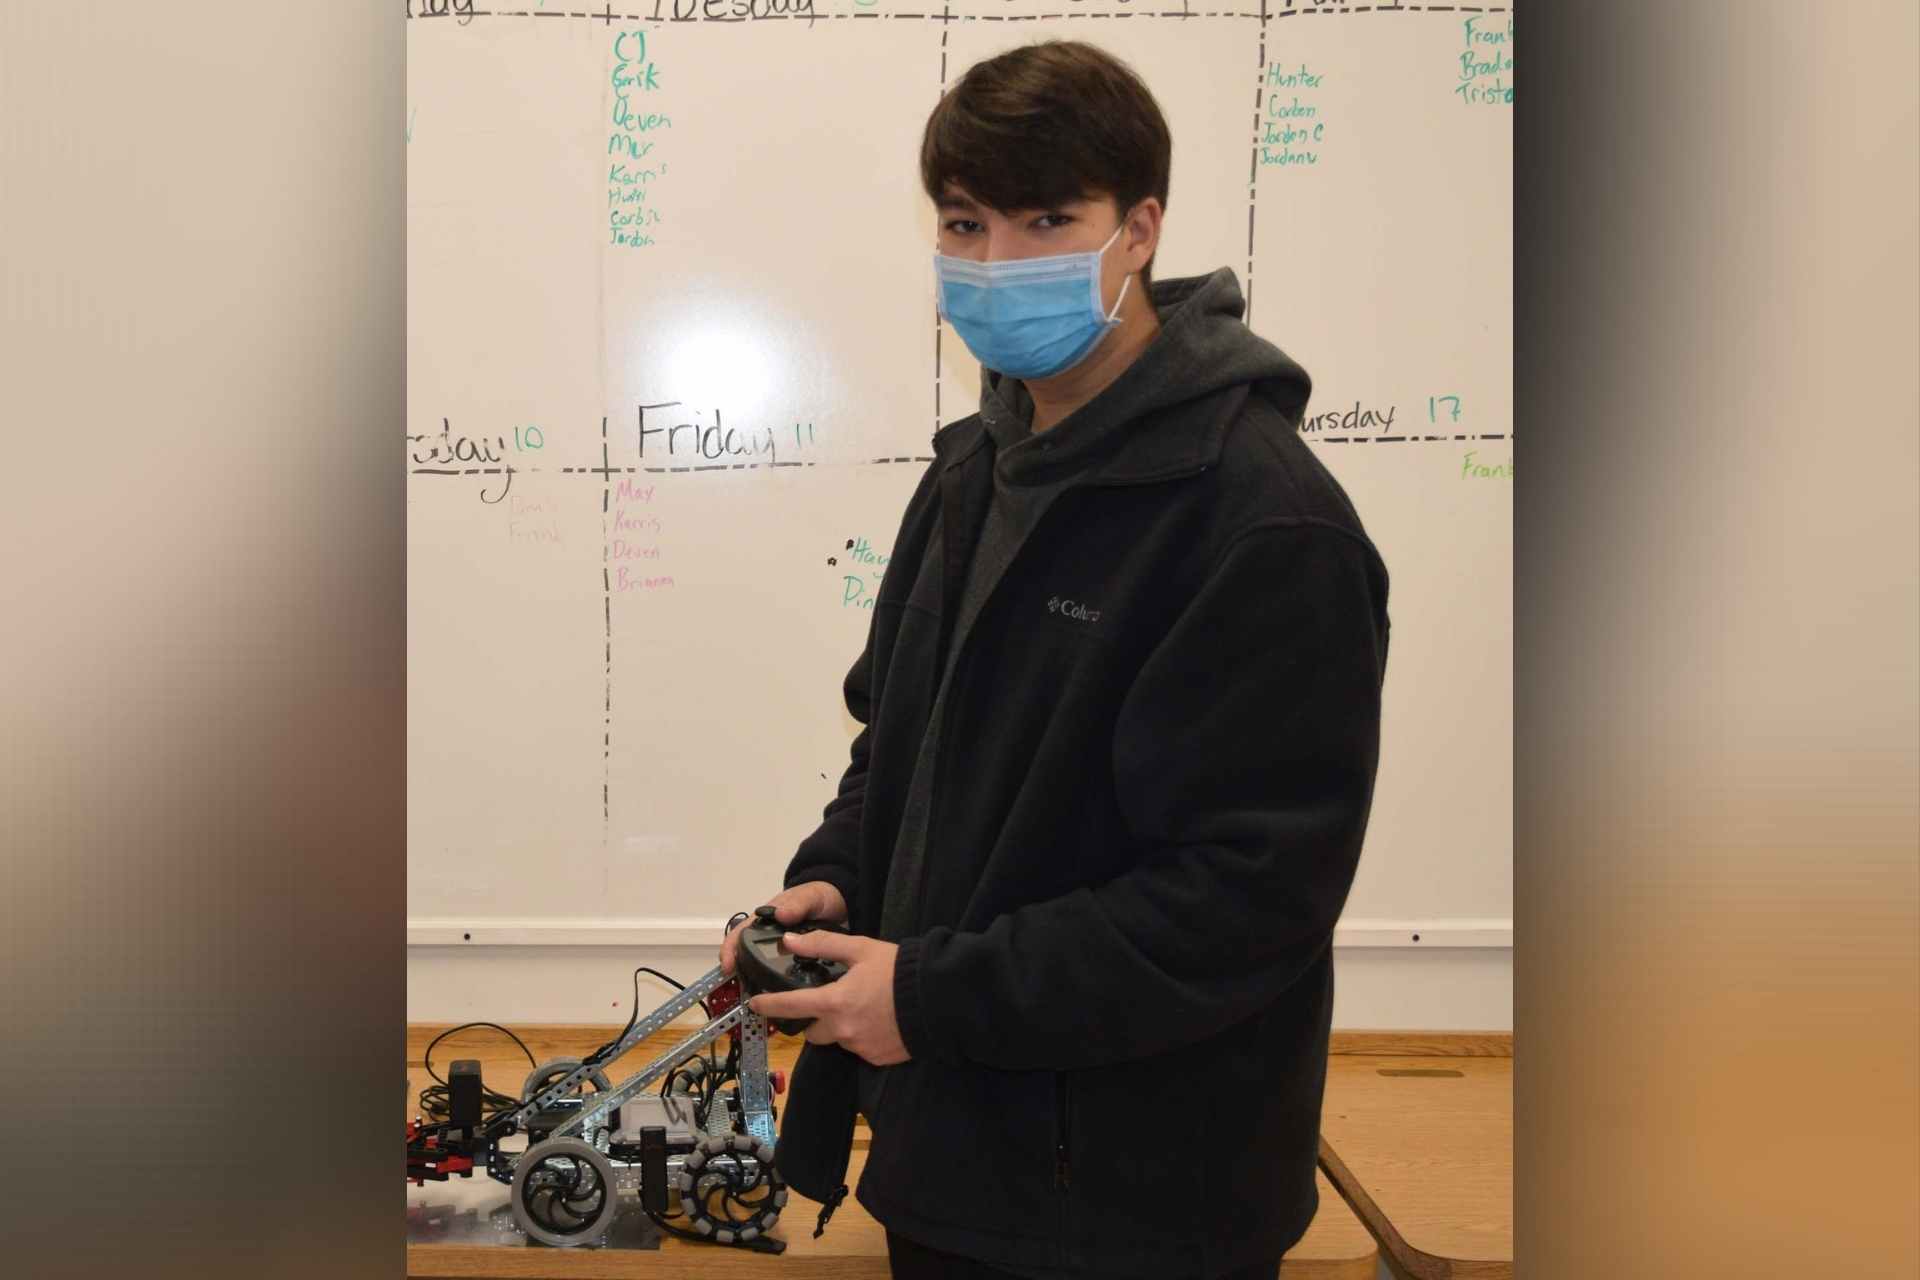 Buckhannon-Upshur High School senior Frankie Ellis with some of the gadgets that Fred Eberle Technical Center students work with daily in classes that focus on computer repair, robotics and drones.